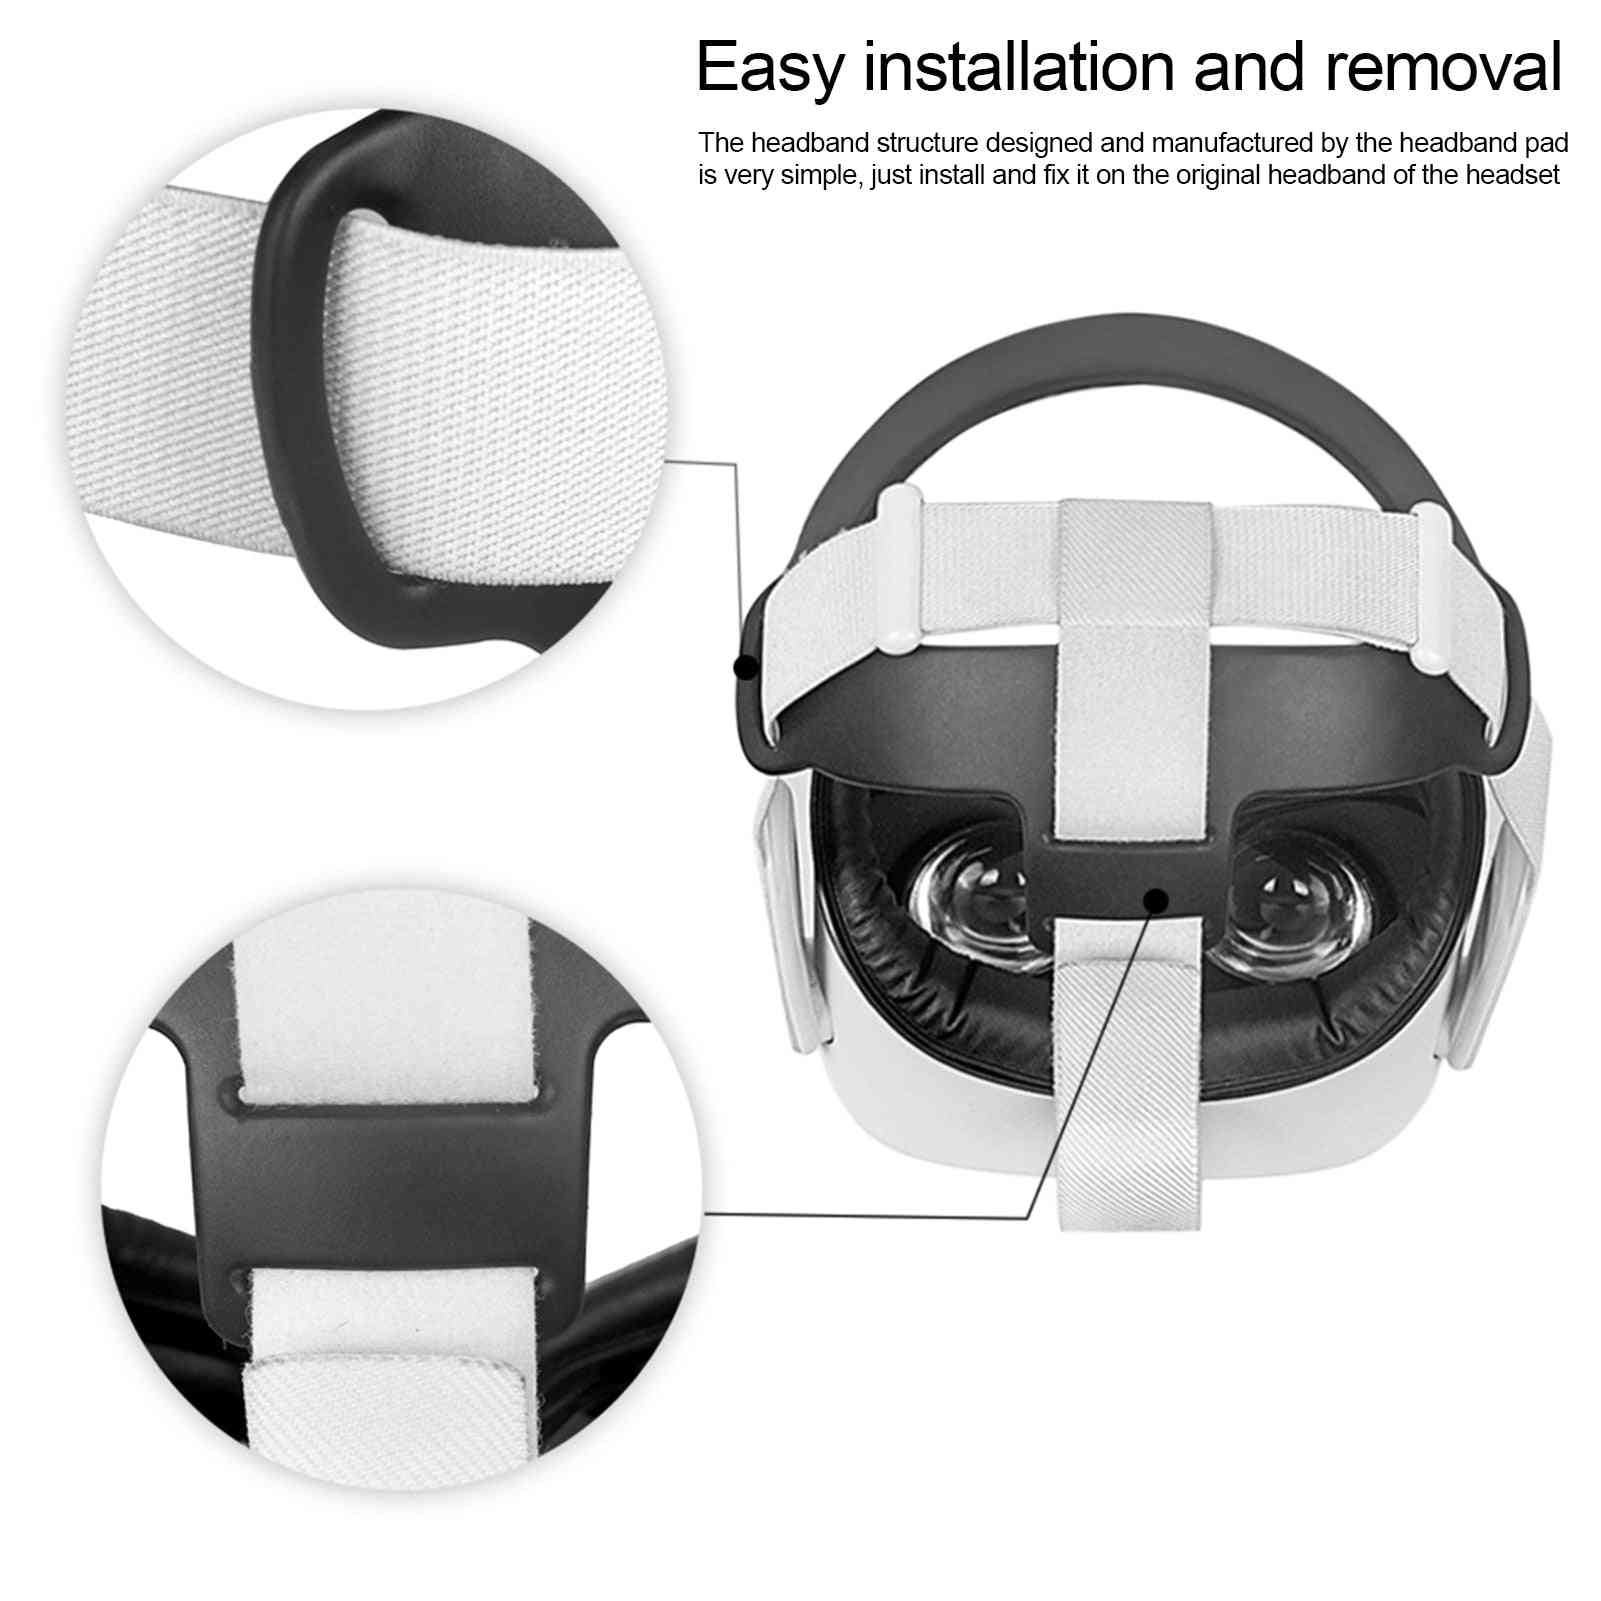 Headband Cushion For Oculus Quest, Vr Headsets, Pad